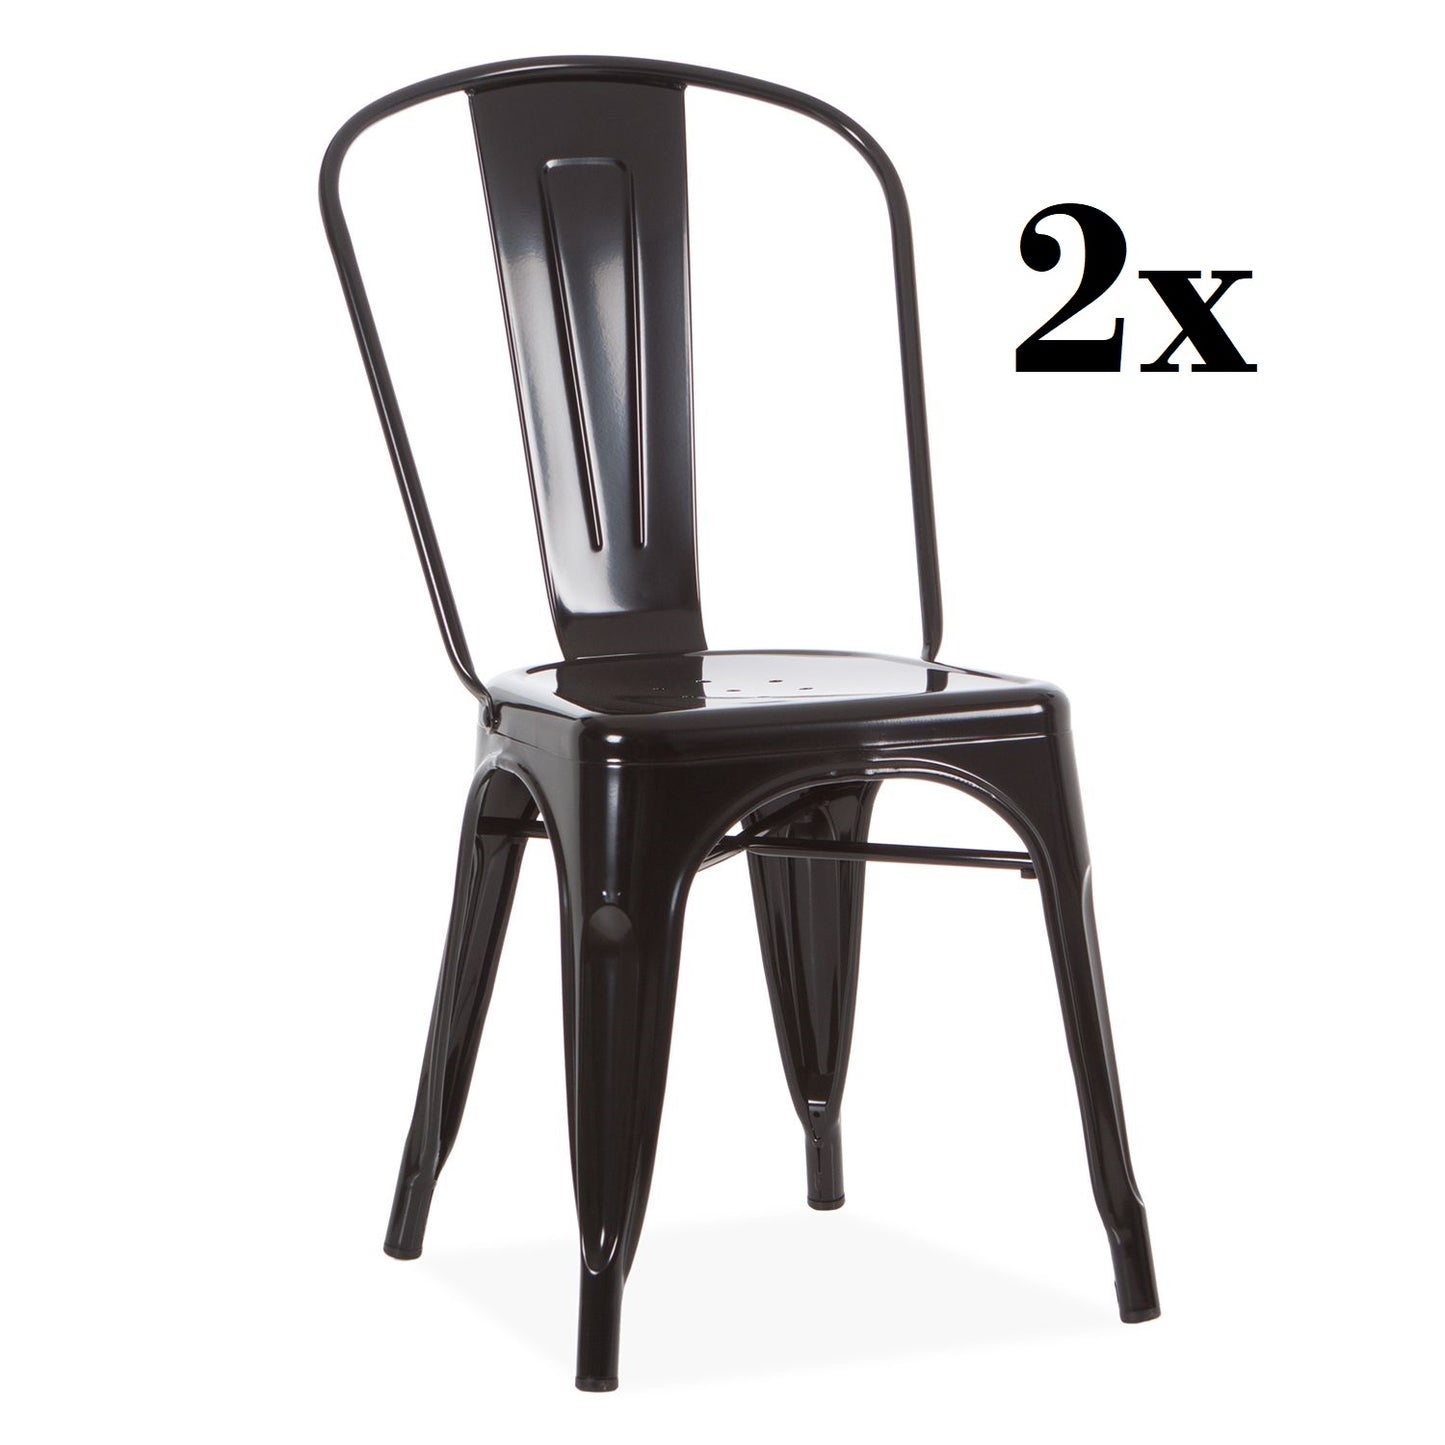 Set of 2x ANNA chairs